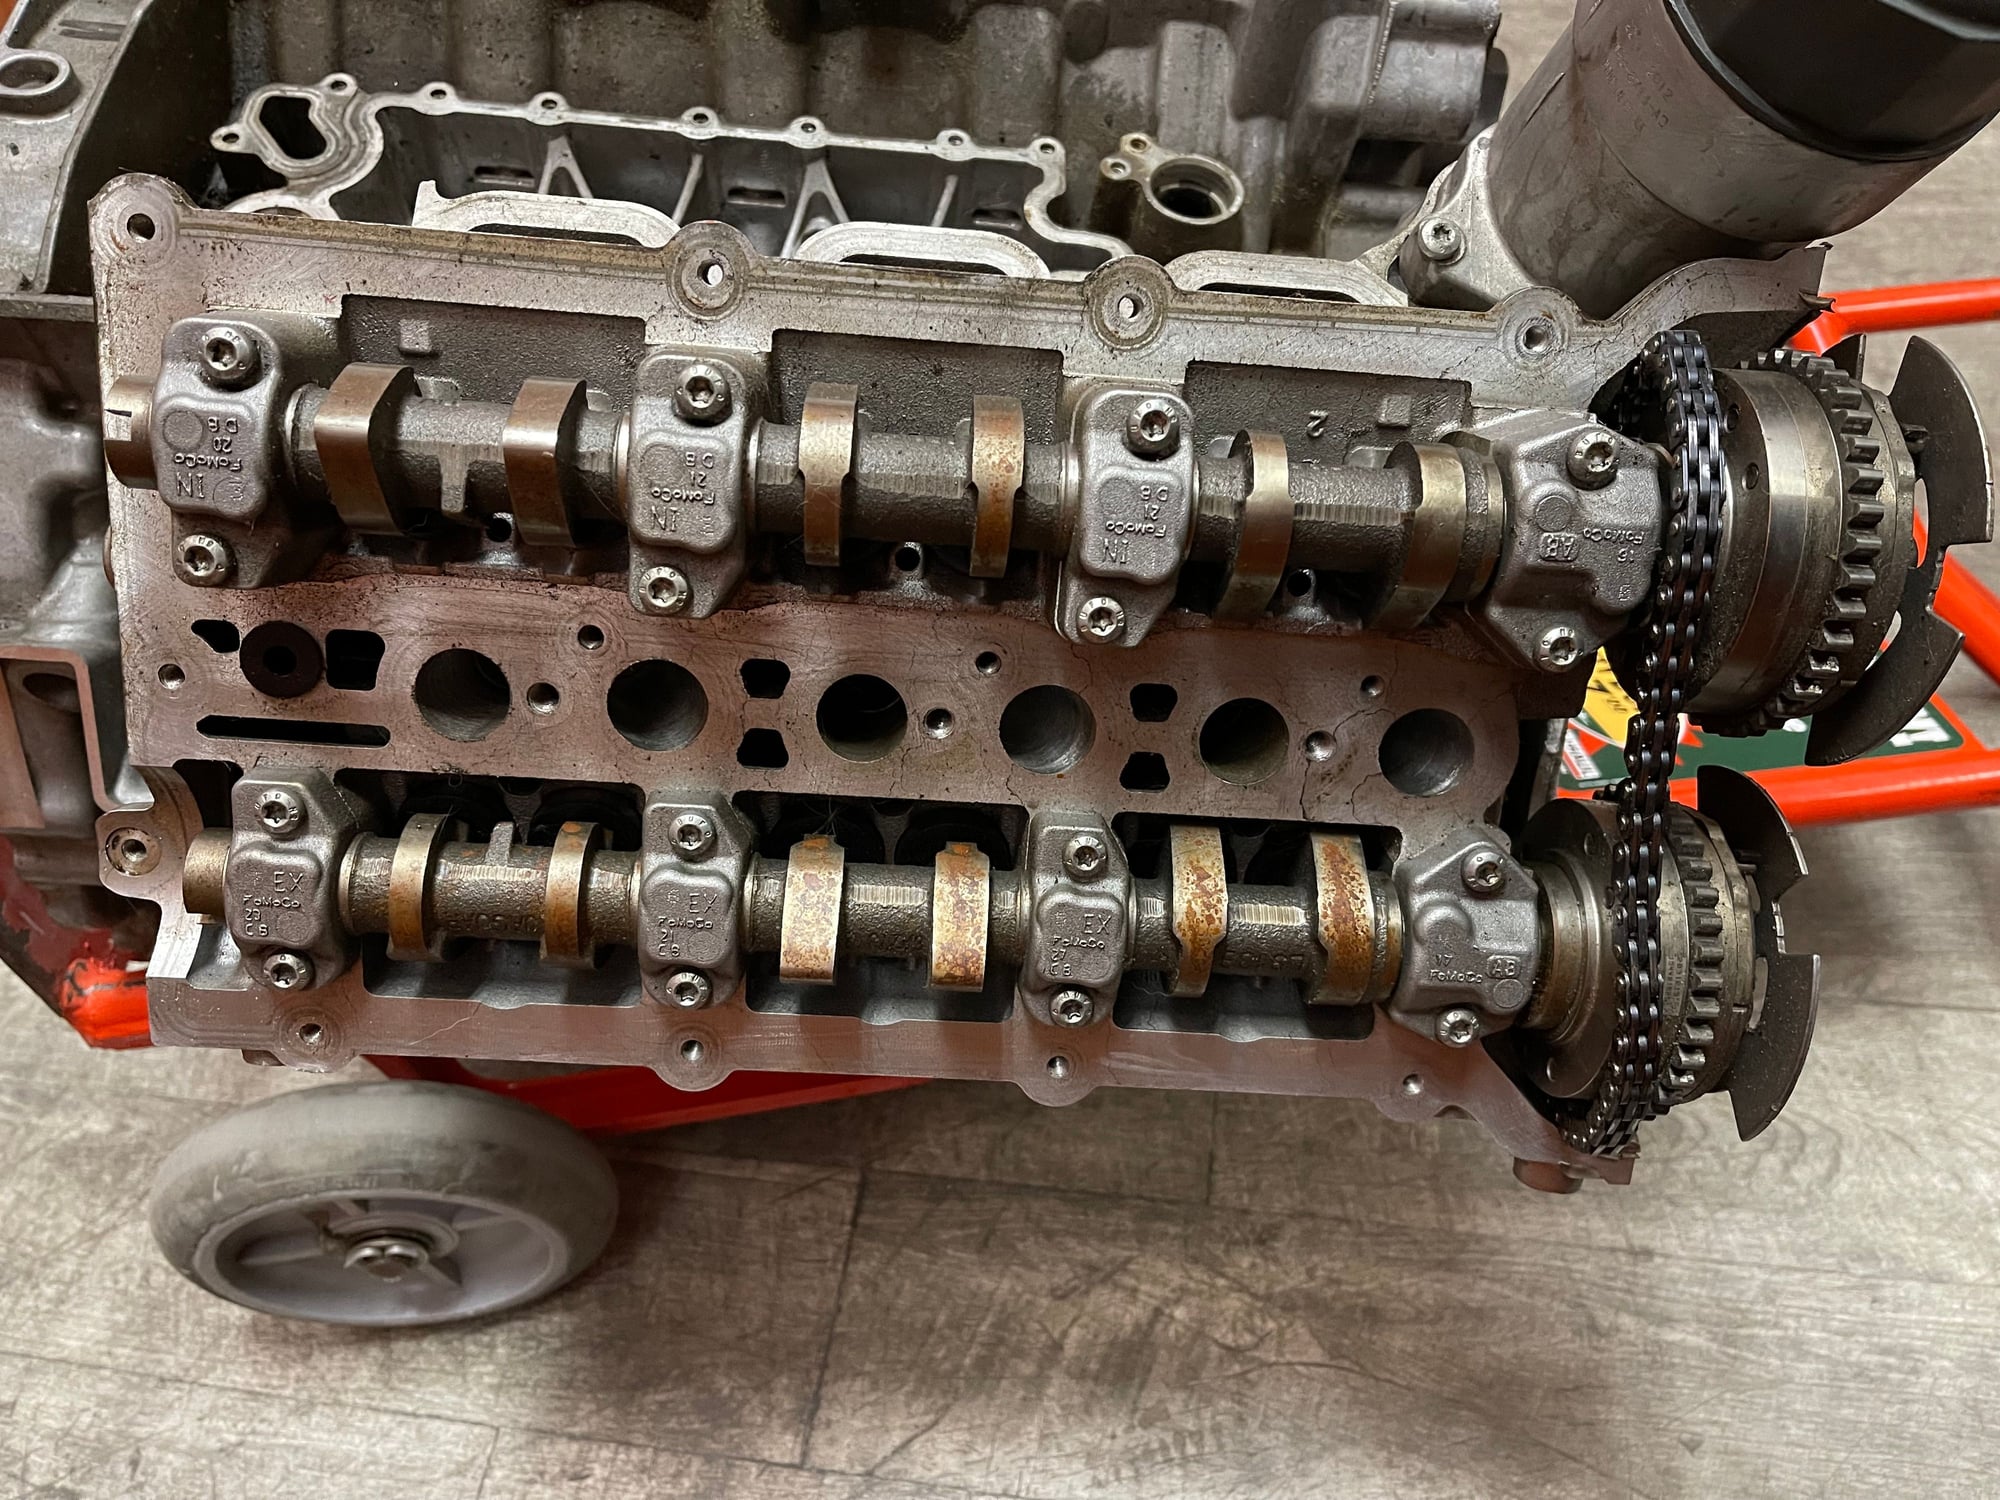 Engine - Internals - Cylinder Heads from 3.0 - Used - 2014 Jaguar F-Type - Dallas, TX 75201, United States